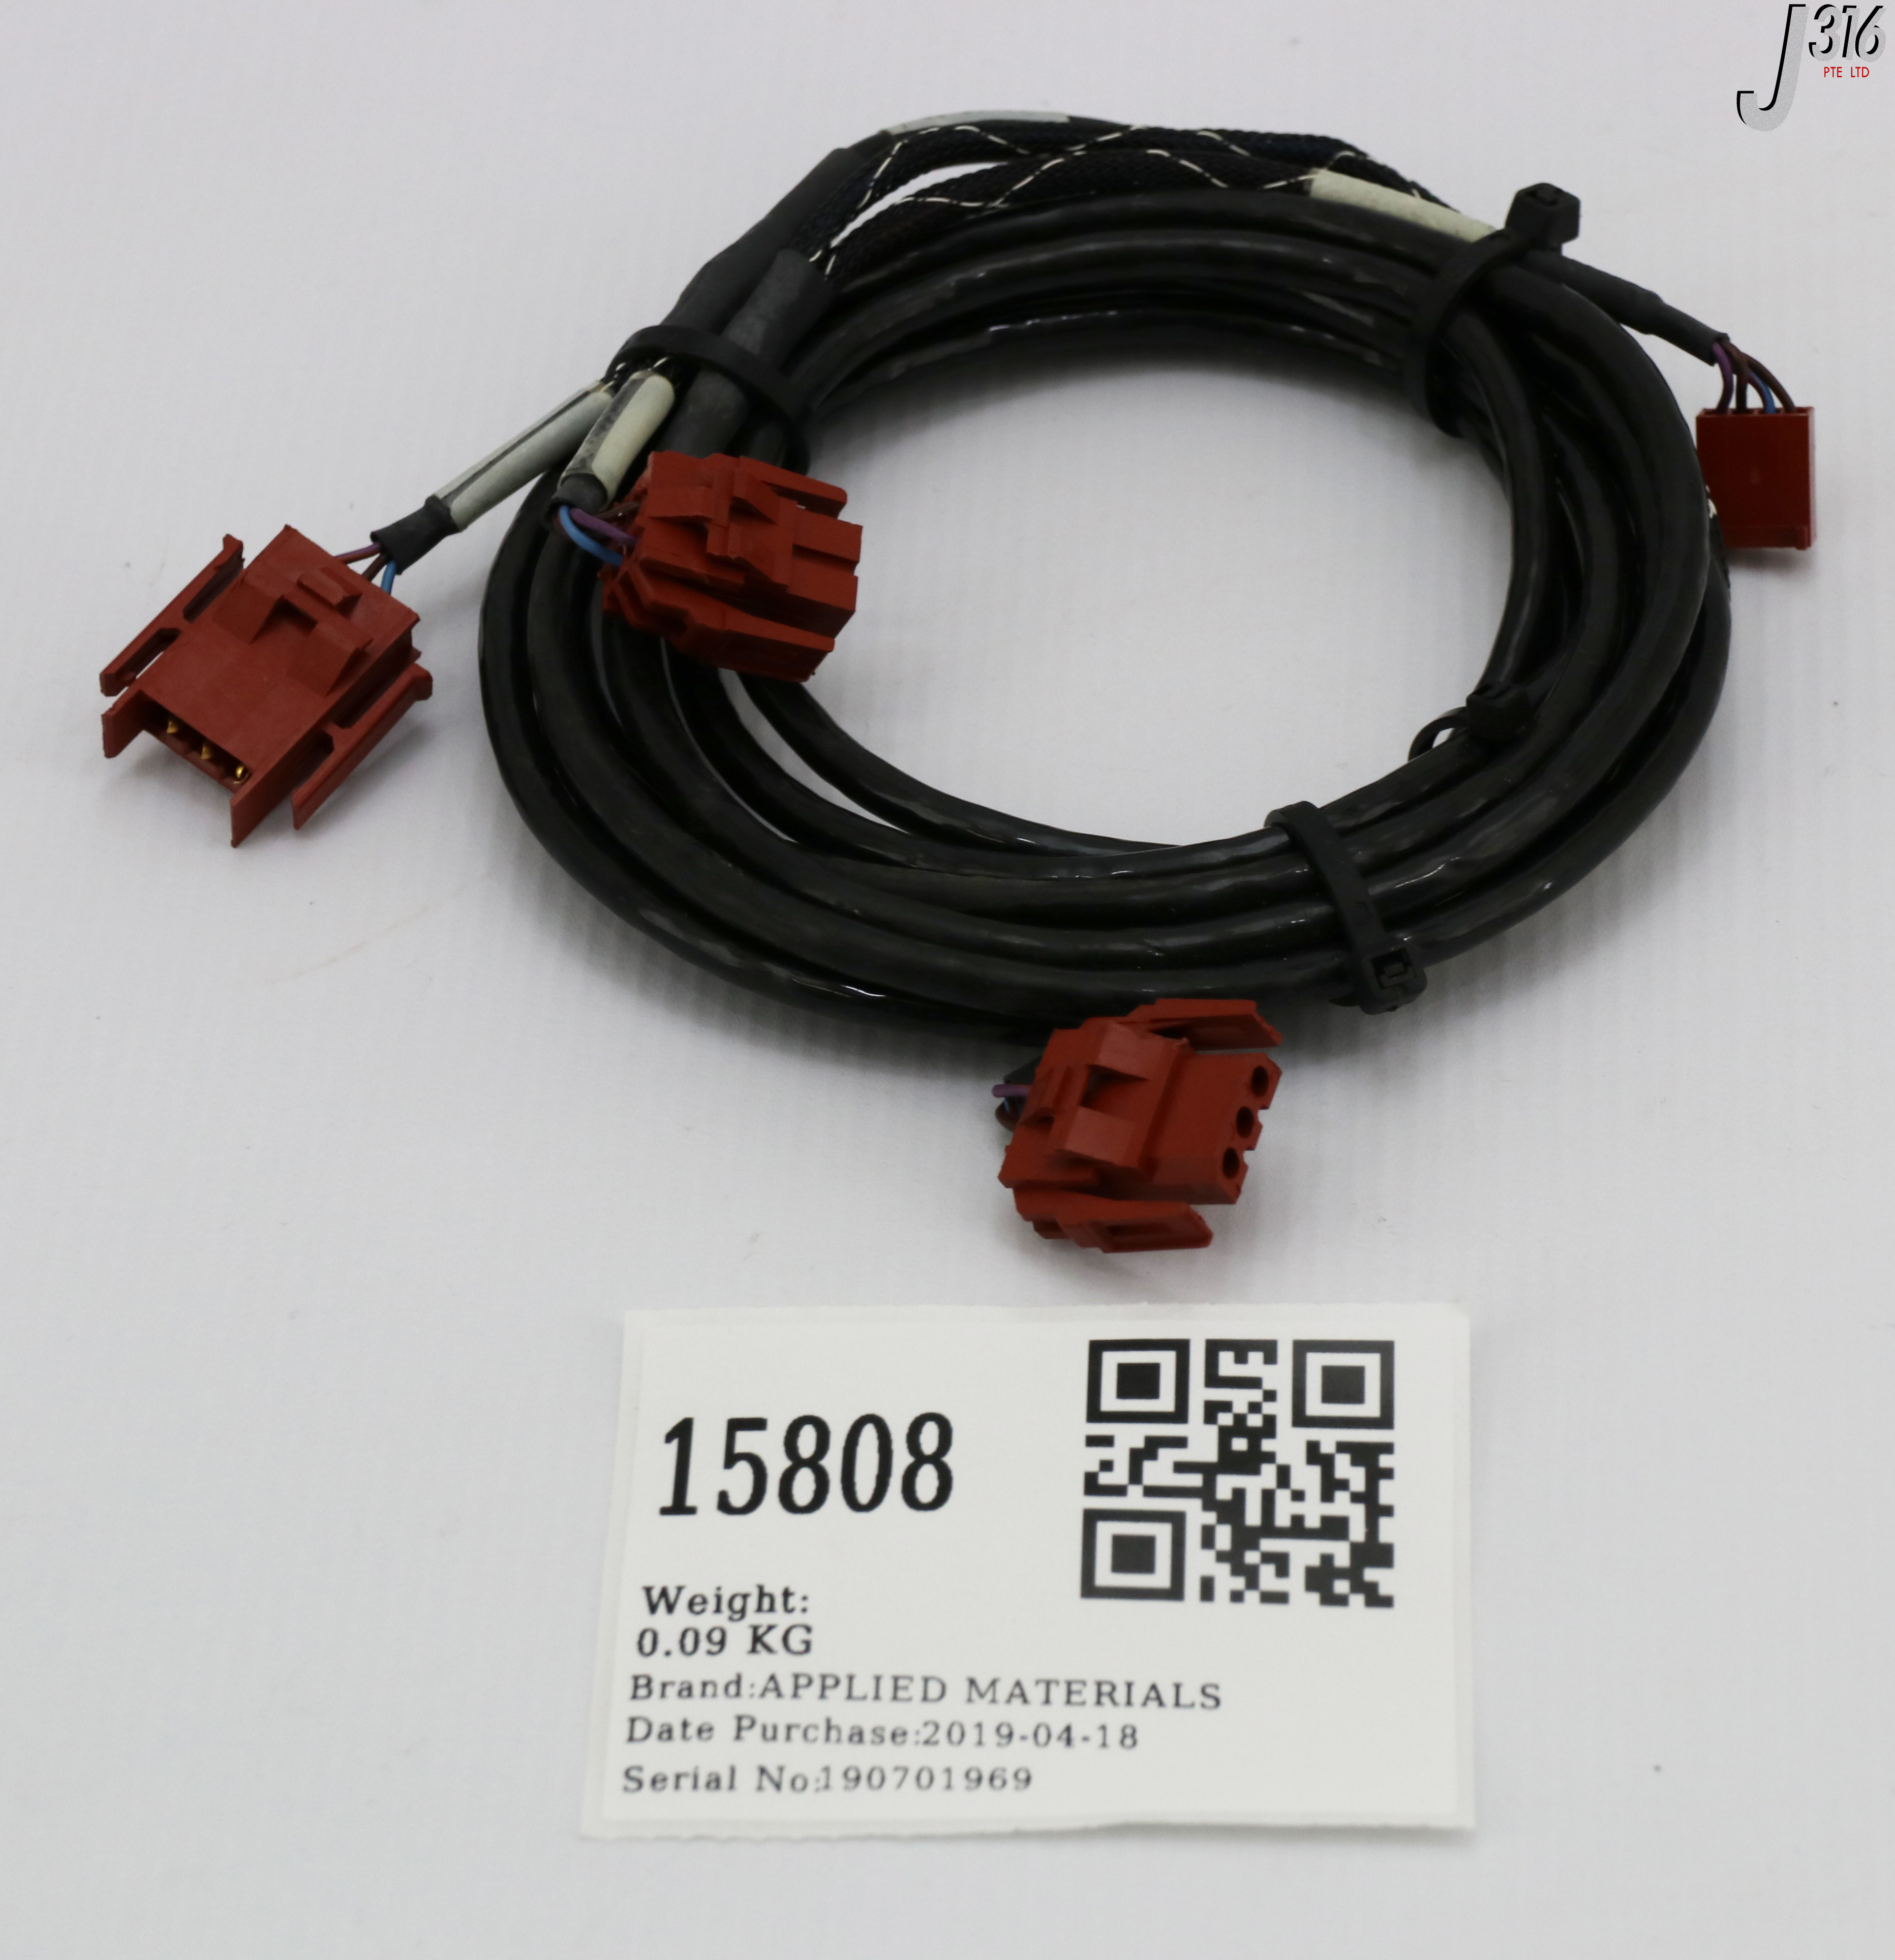 BFR UTI RGA-POS 8 NEW Details about   142-0601// AMAT APPLIED 0150-76259 CABLE ASSY 